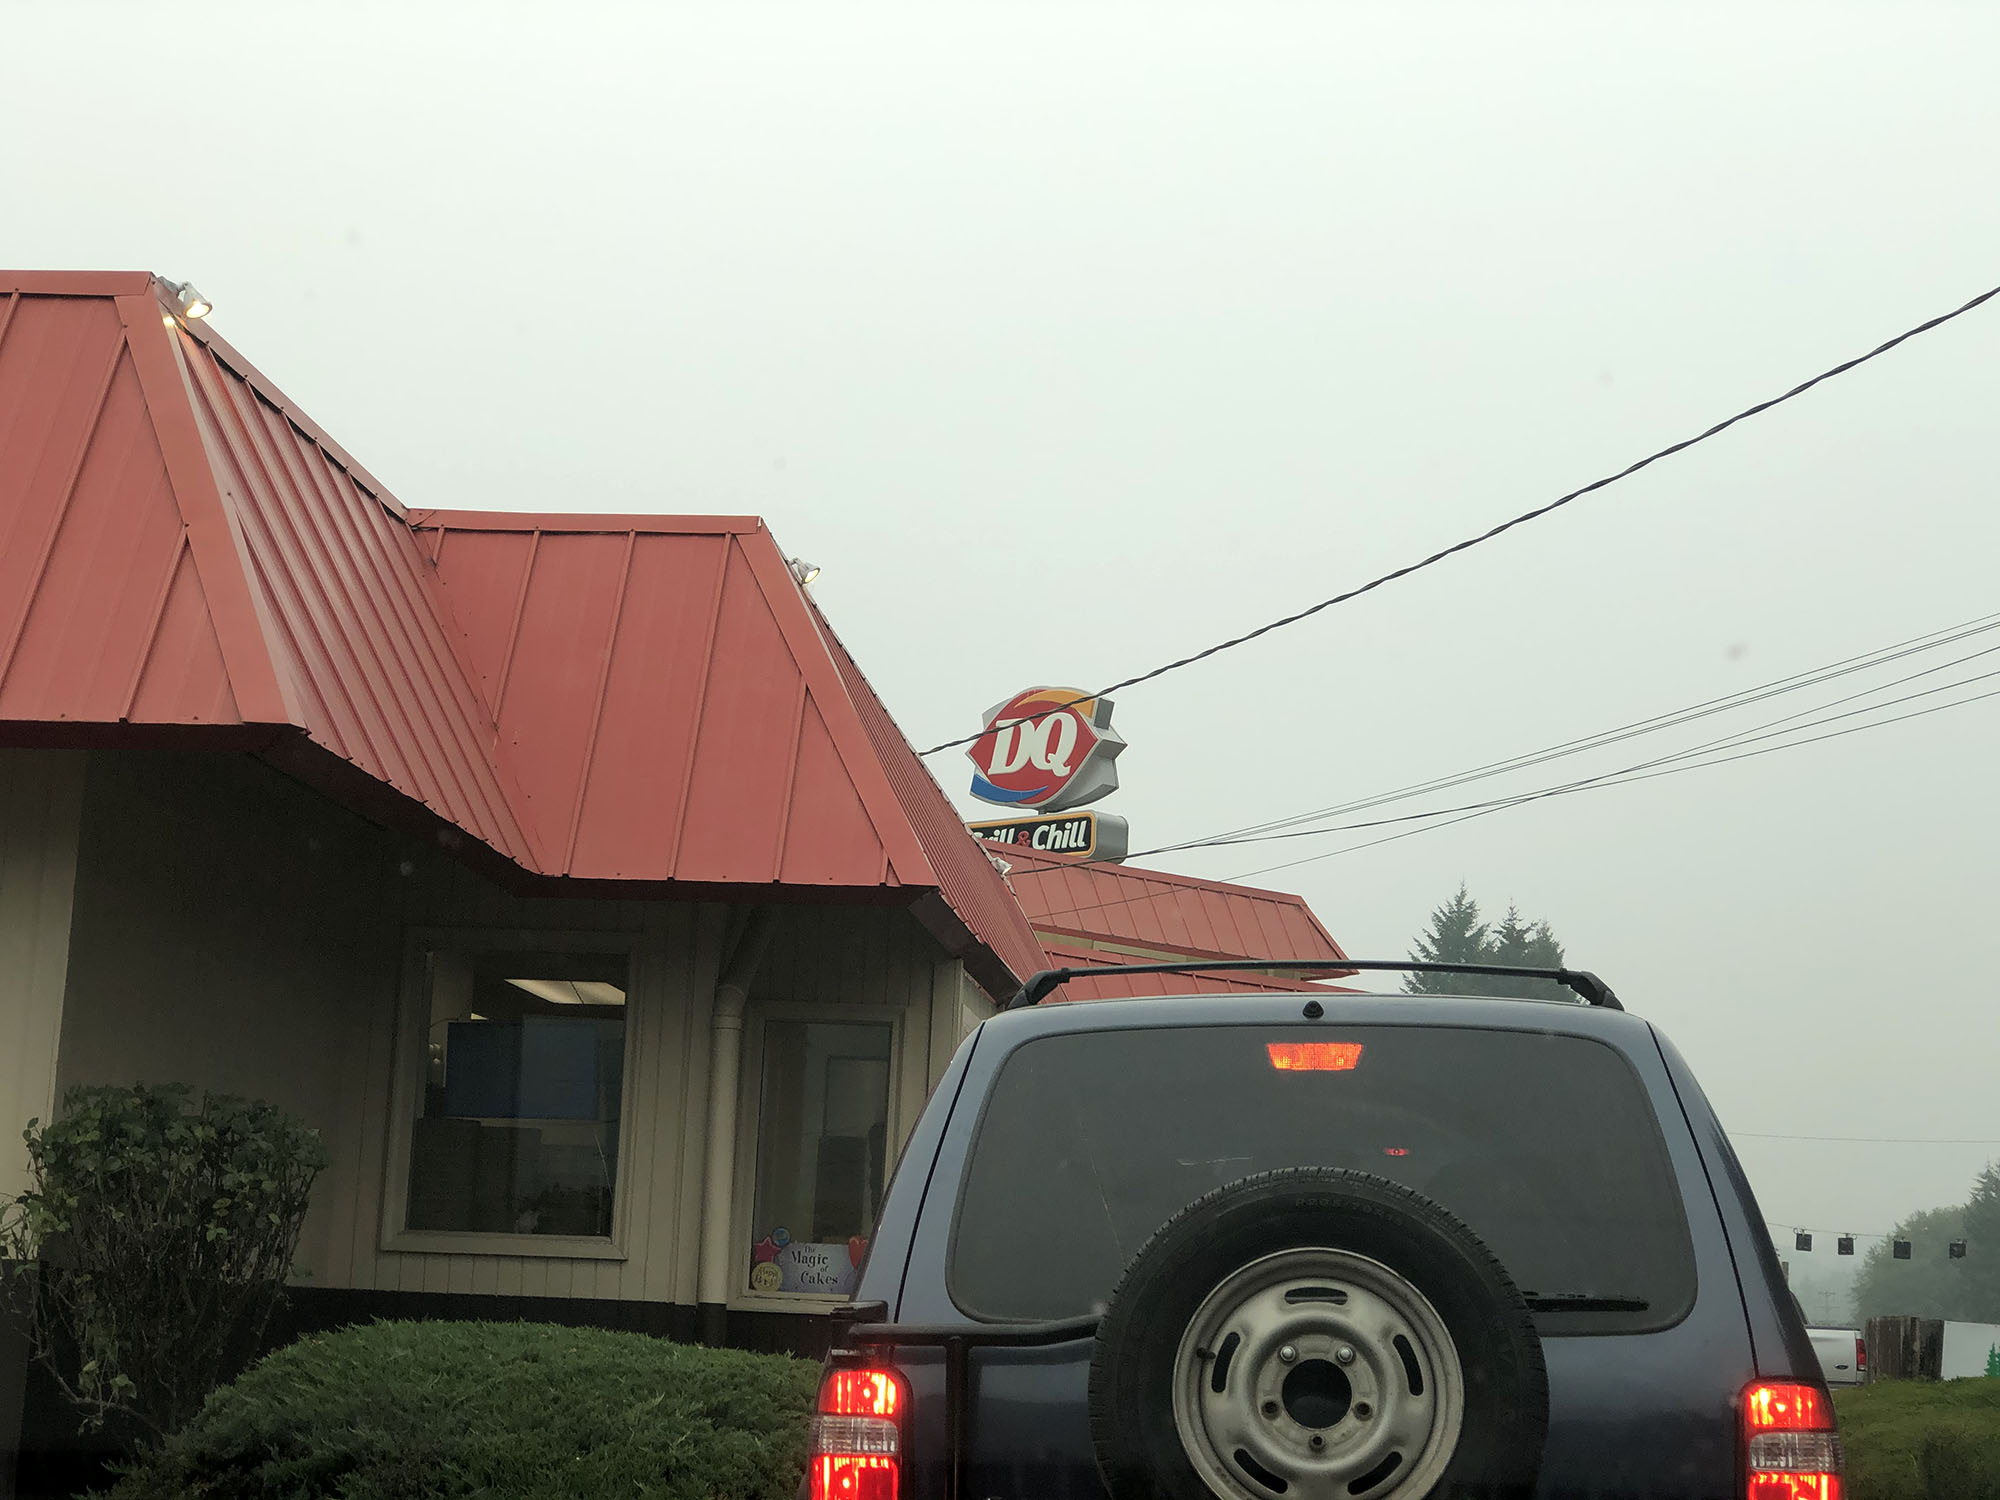 If you are repeatedly visiting a field site, find a nearby location with a clean restroom, water source, and possibly food as well.  When we do estuary work, the Dairy Queen in Toledo, Oregon is a favorite stop.